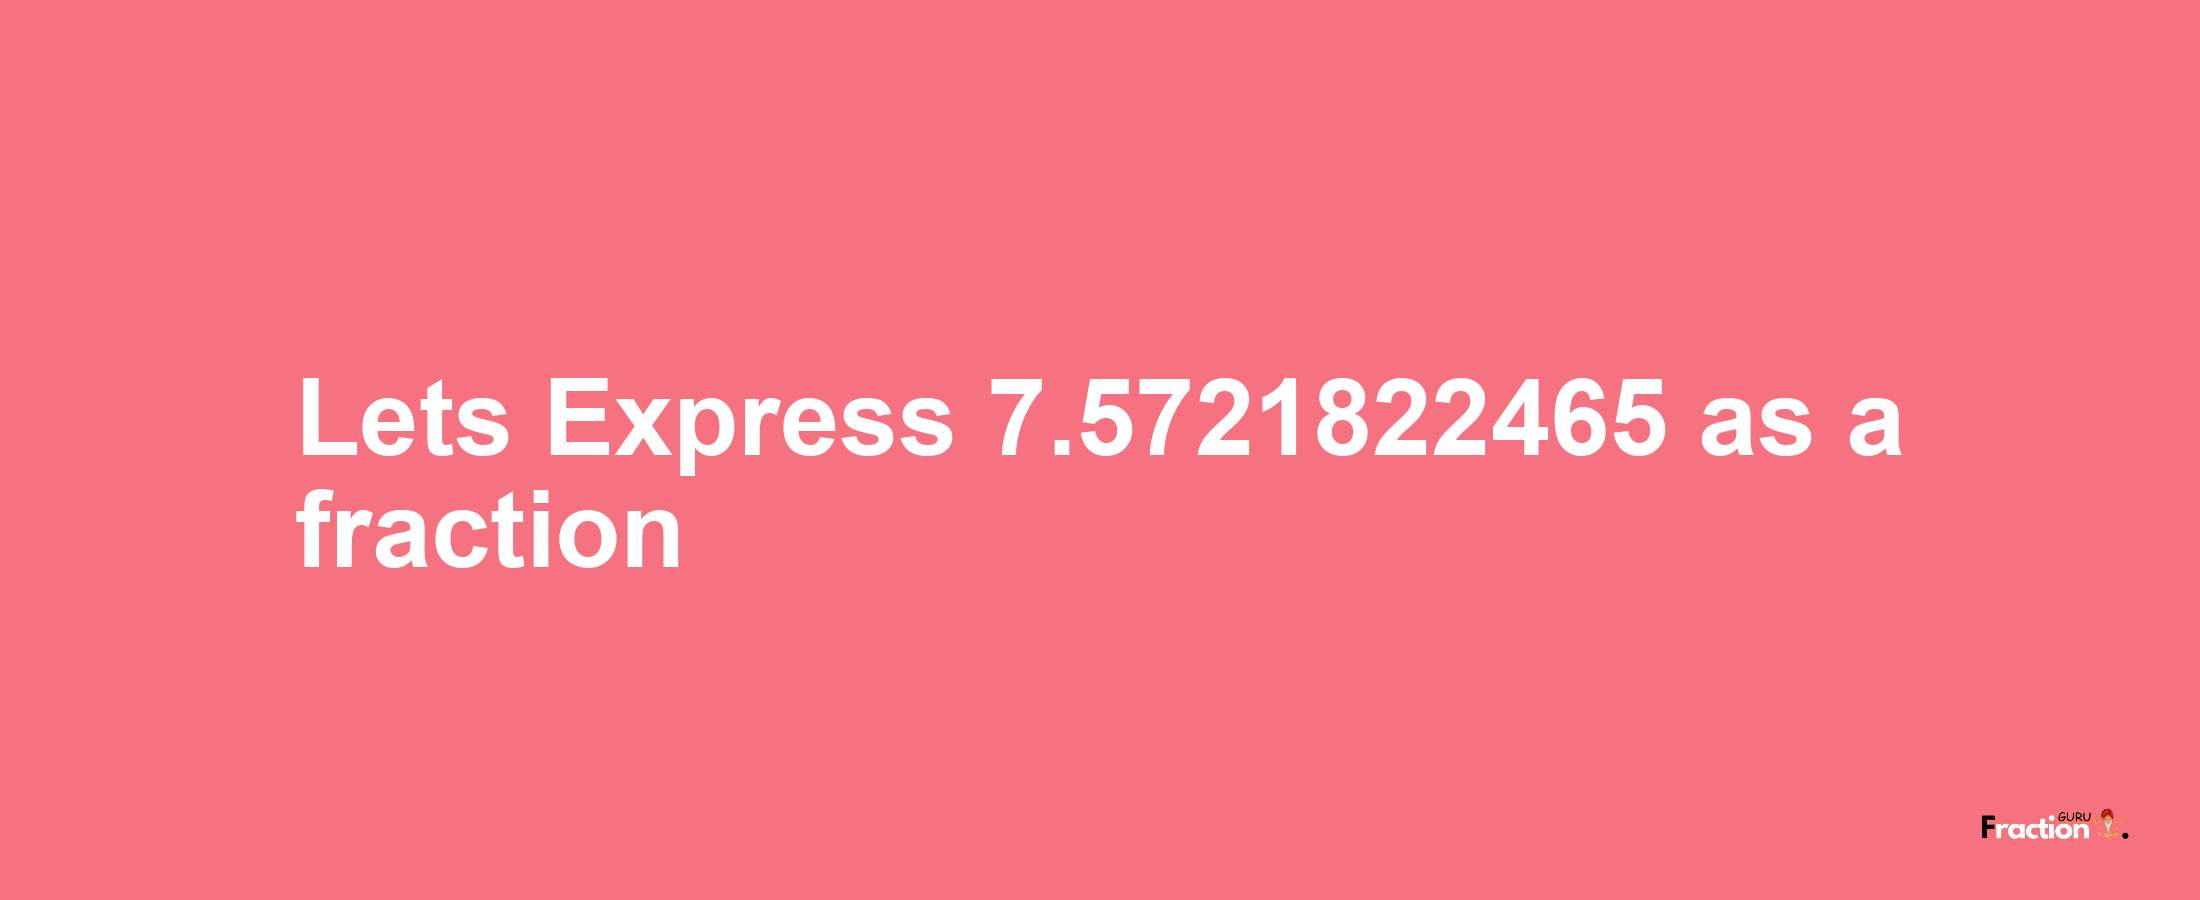 Lets Express 7.5721822465 as afraction